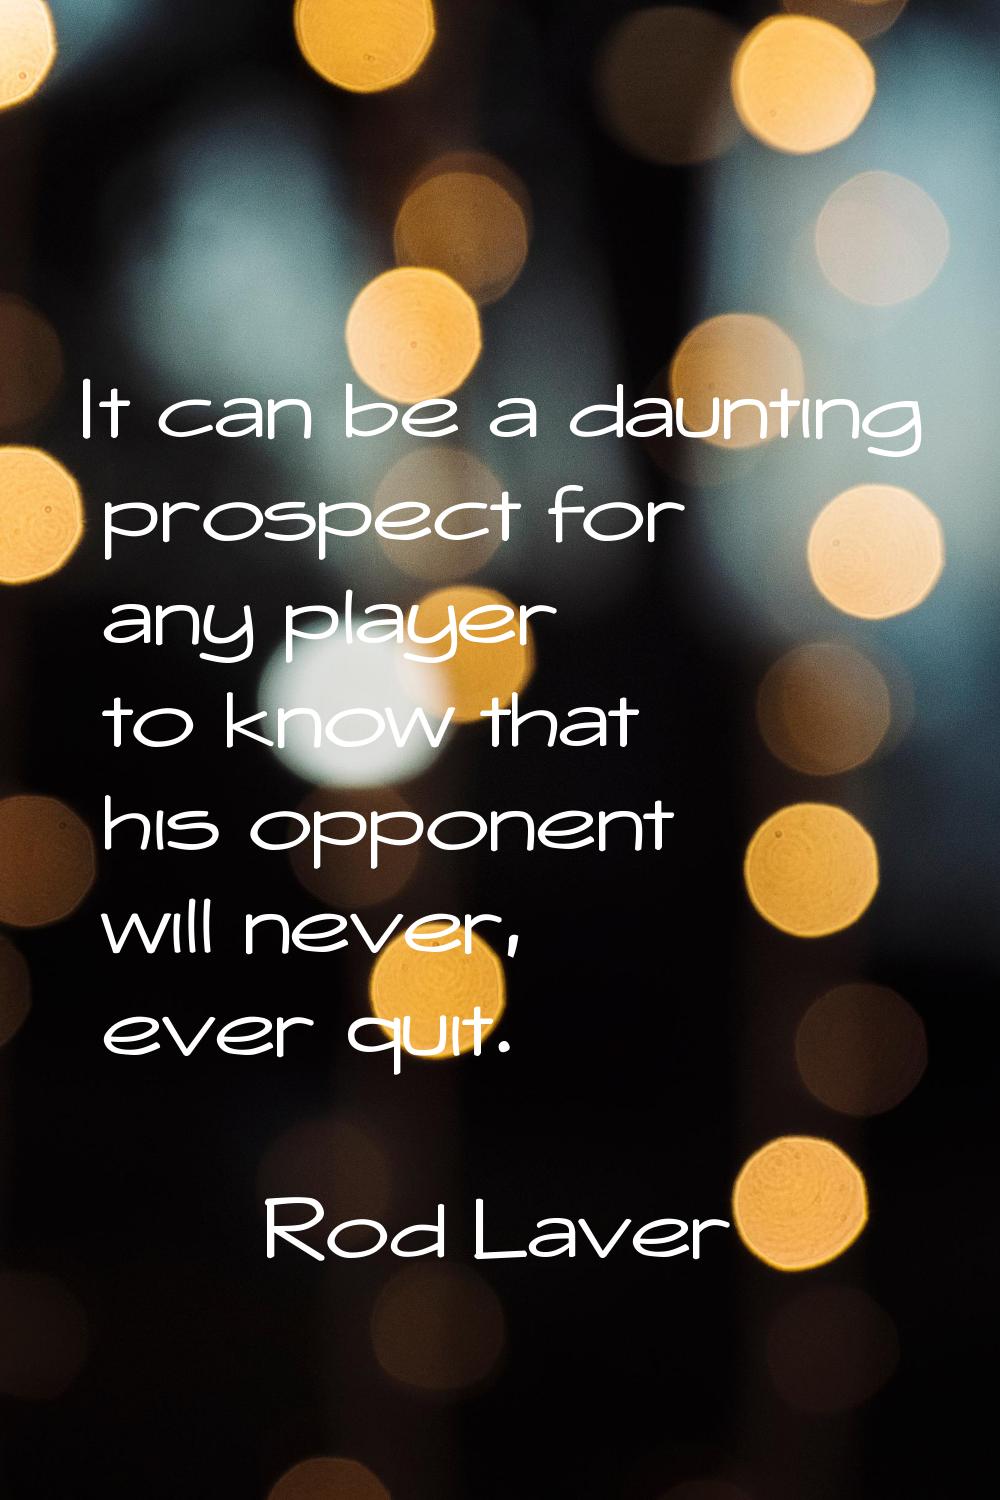 It can be a daunting prospect for any player to know that his opponent will never, ever quit.